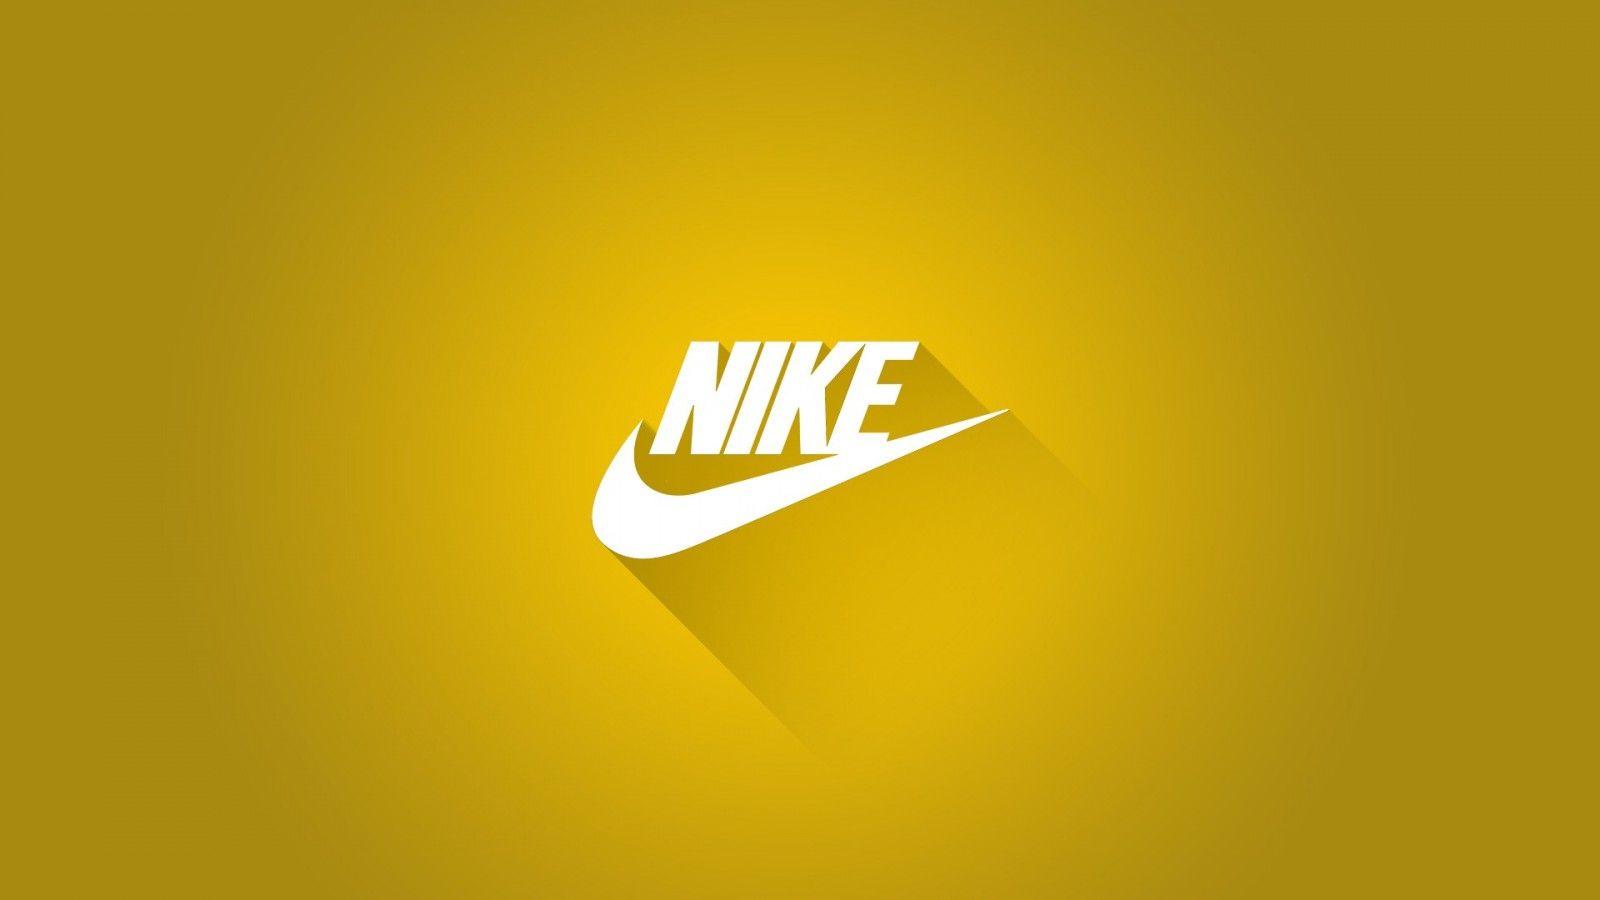 Wallpaper, Nike, simple background, text, logo, yellow, graphic